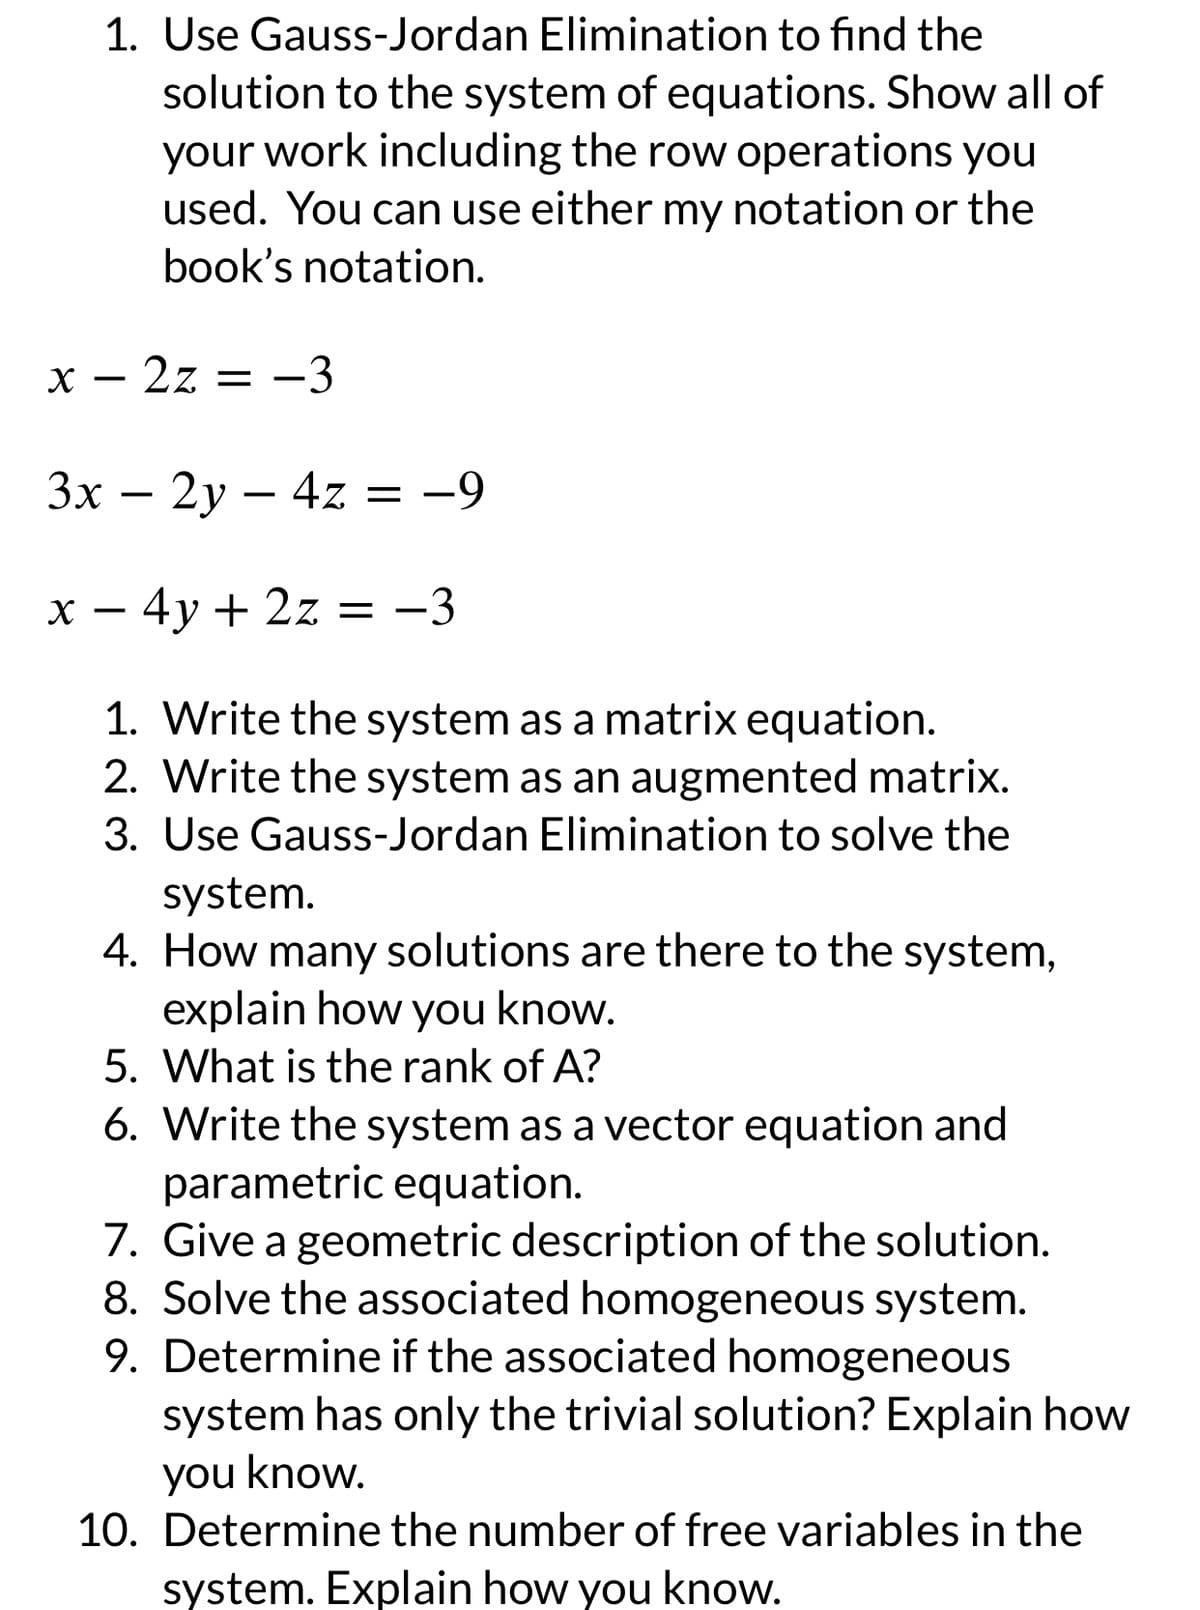 1. Use Gauss-Jordan Elimination to find the
solution to the system of equations. Show all of
your work including the row operations you
used. You can use either my notation or the
book's notation.
x - 2z = -3
3x - 2y - 4z = -9
x - 4y + 2z = -3
1. Write the system as a matrix equation.
2. Write the system as an augmented matrix.
3. Use Gauss-Jordan Elimination to solve the
system.
4. How many solutions are there to the system,
explain how you know.
5. What is the rank of A?
6. Write the system as a vector equation and
parametric equation.
7. Give a geometric description of the solution.
8. Solve the associated homogeneous system.
9. Determine if the associated homogeneous
system has only the trivial solution? Explain how
you know.
10. Determine the number of free variables in the
system. Explain how you know.